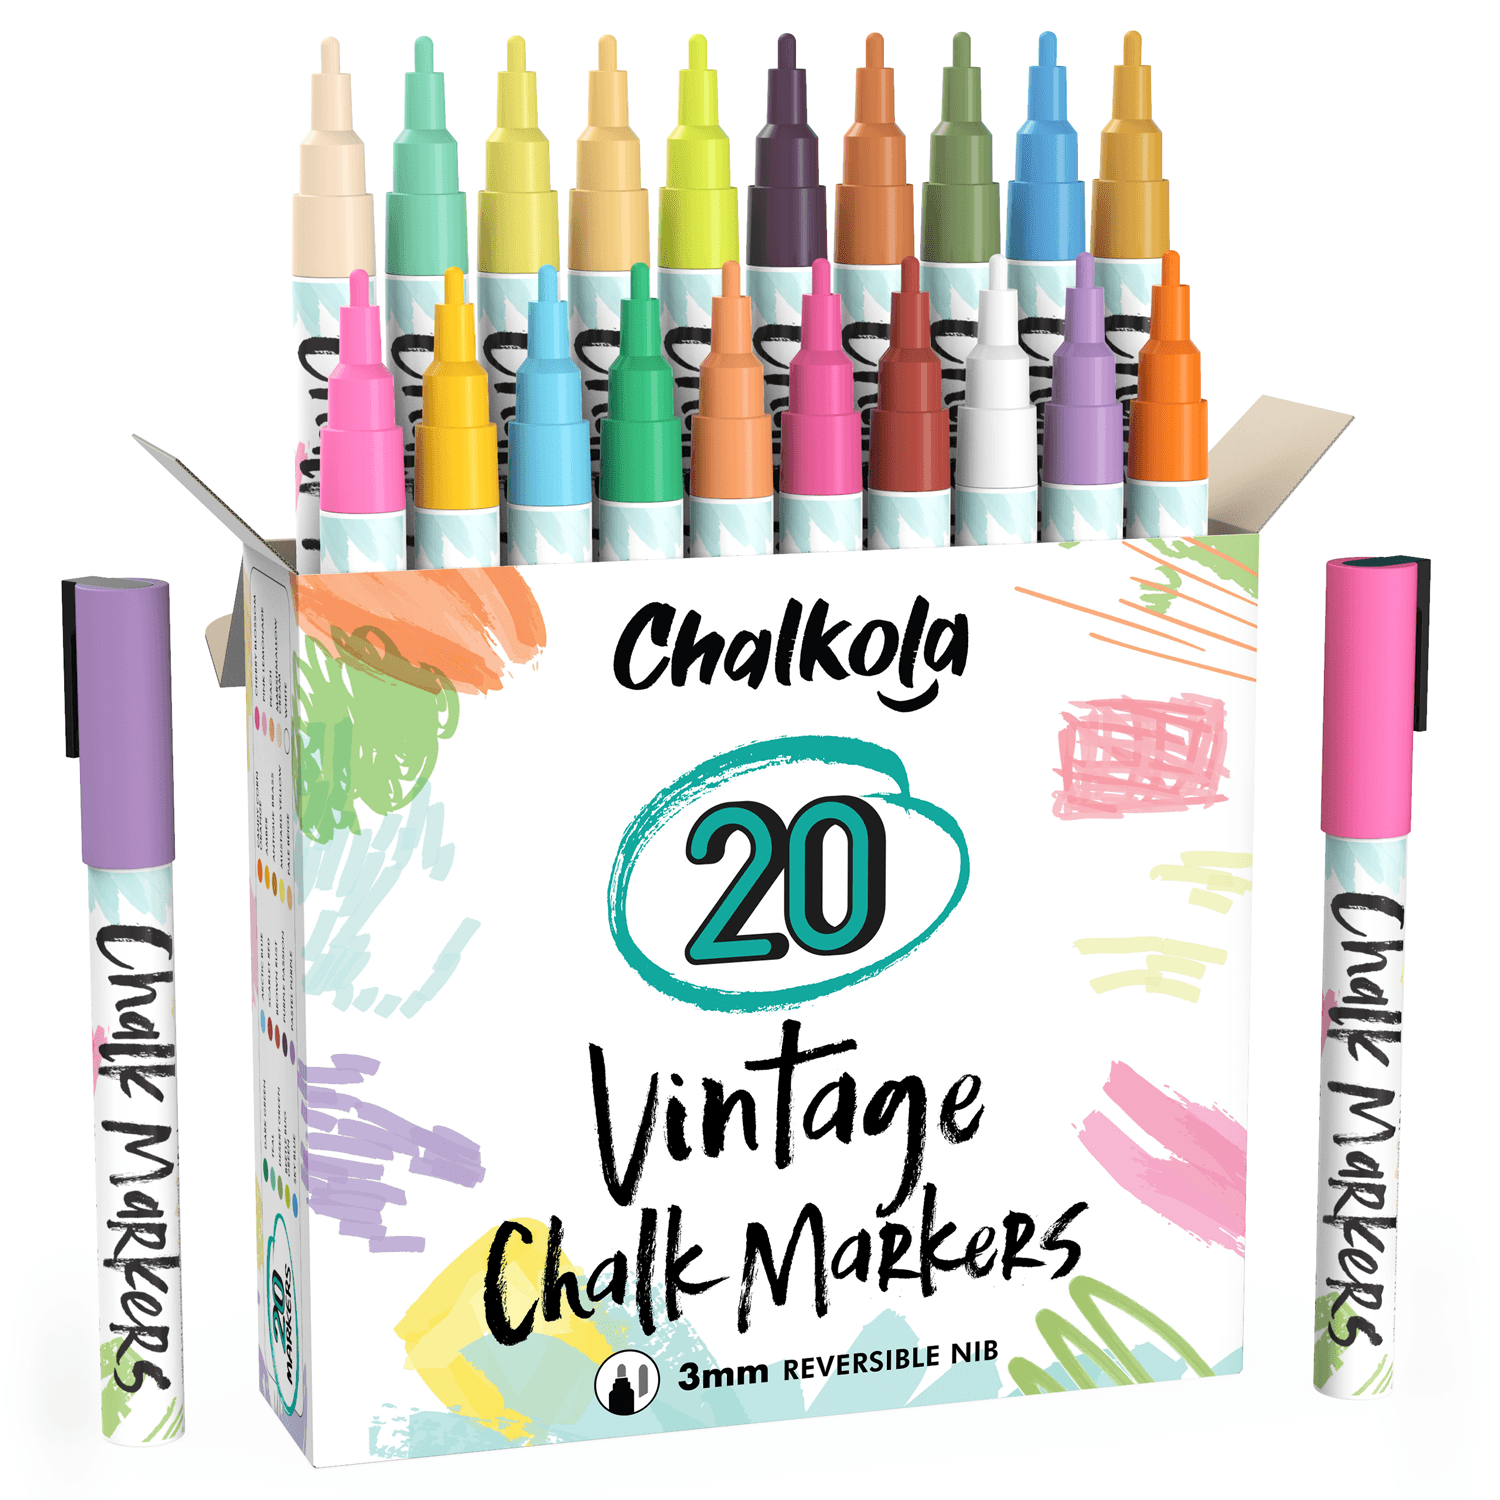 Classic Earthy Colors Chalk Markers with 6mm Reversible Nib - Pack of 8 Pens  - Chalkola Art Supply